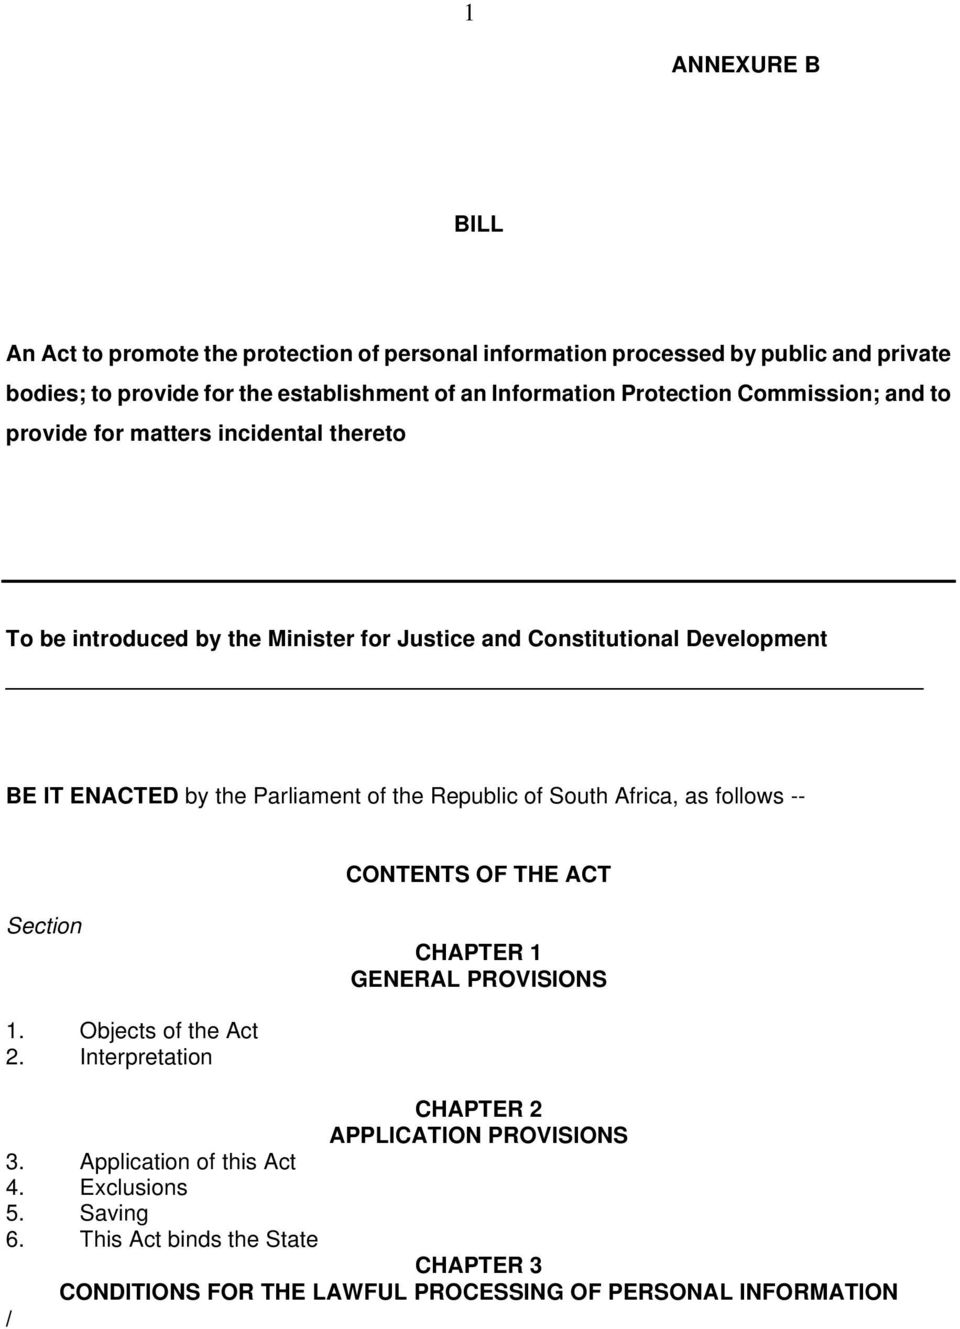 Parliament of the Republic of South Africa, as follows -- CONTENTS OF THE ACT Section CHAPTER 1 GENERAL PROVISIONS 1. Objects of the Act 2. Interpretation 3.